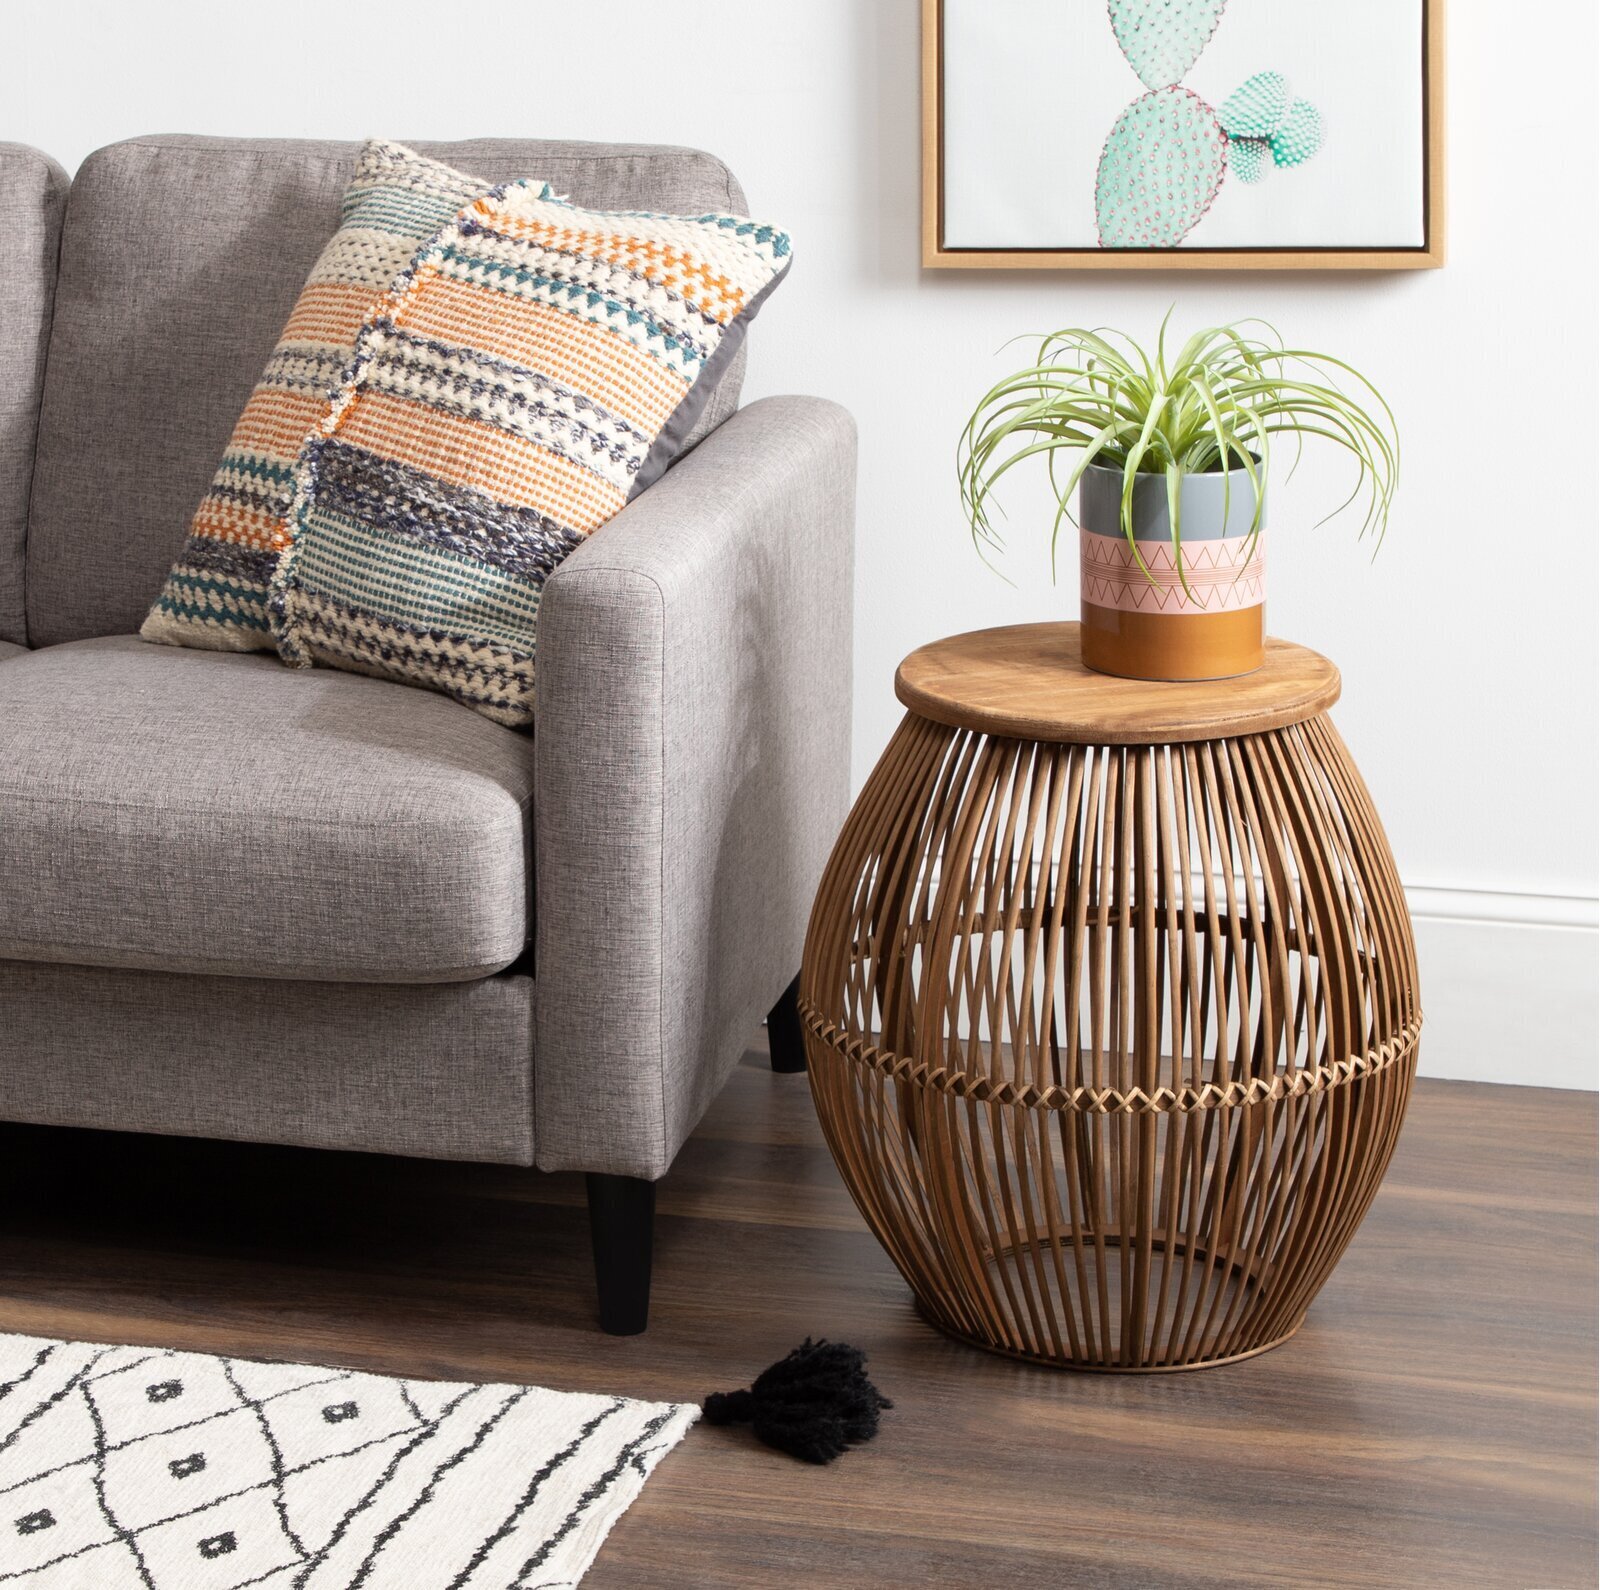 Bamboo side table in a stylish design